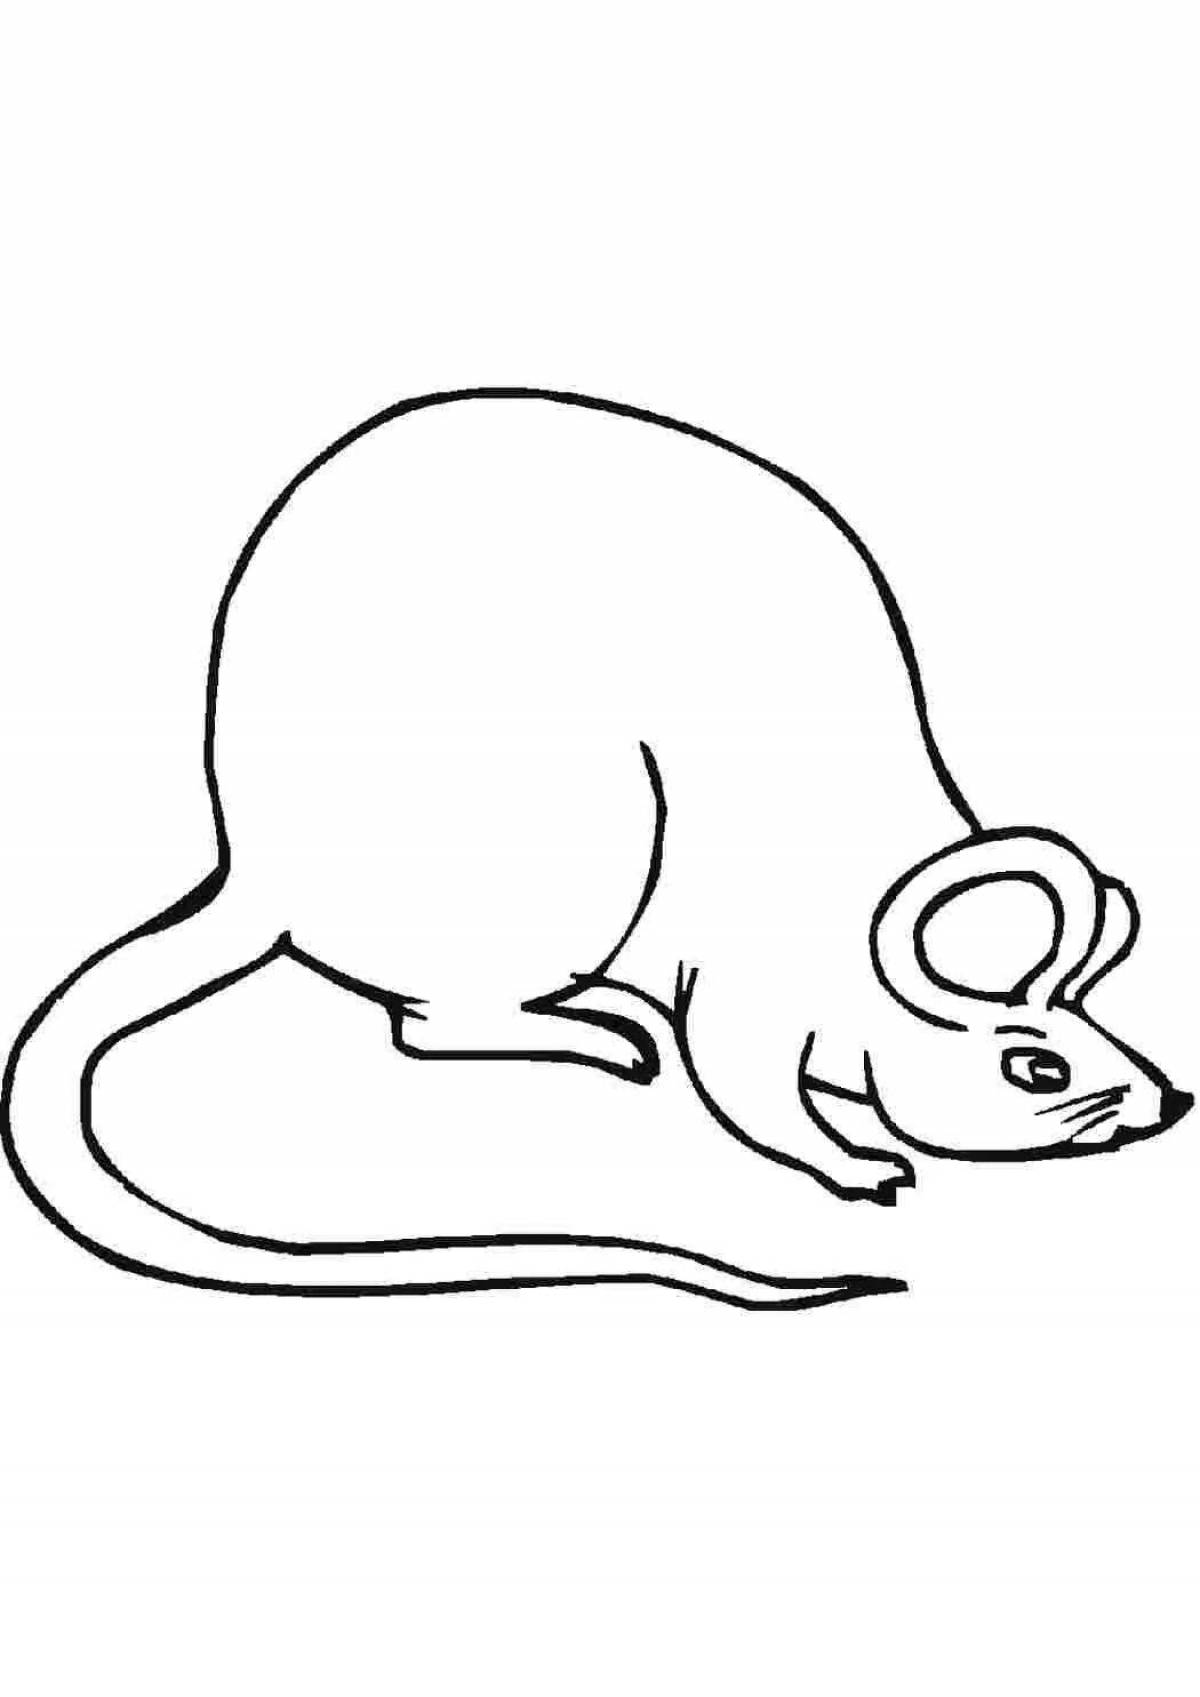 Rampant fox and mouse coloring page